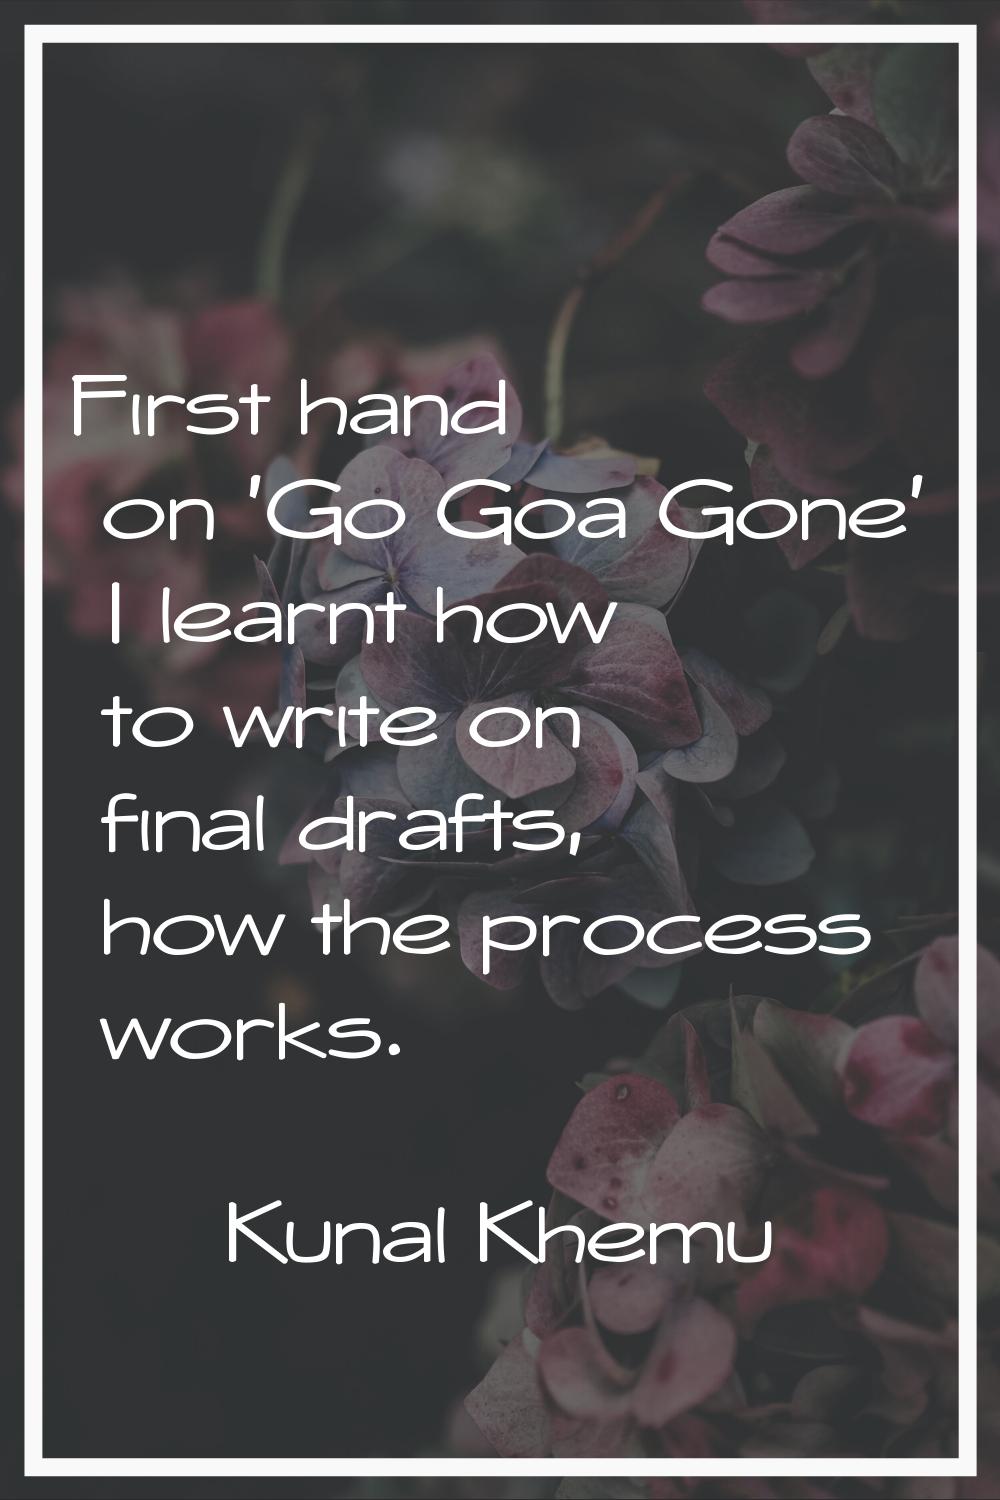 First hand on 'Go Goa Gone' I learnt how to write on final drafts, how the process works.